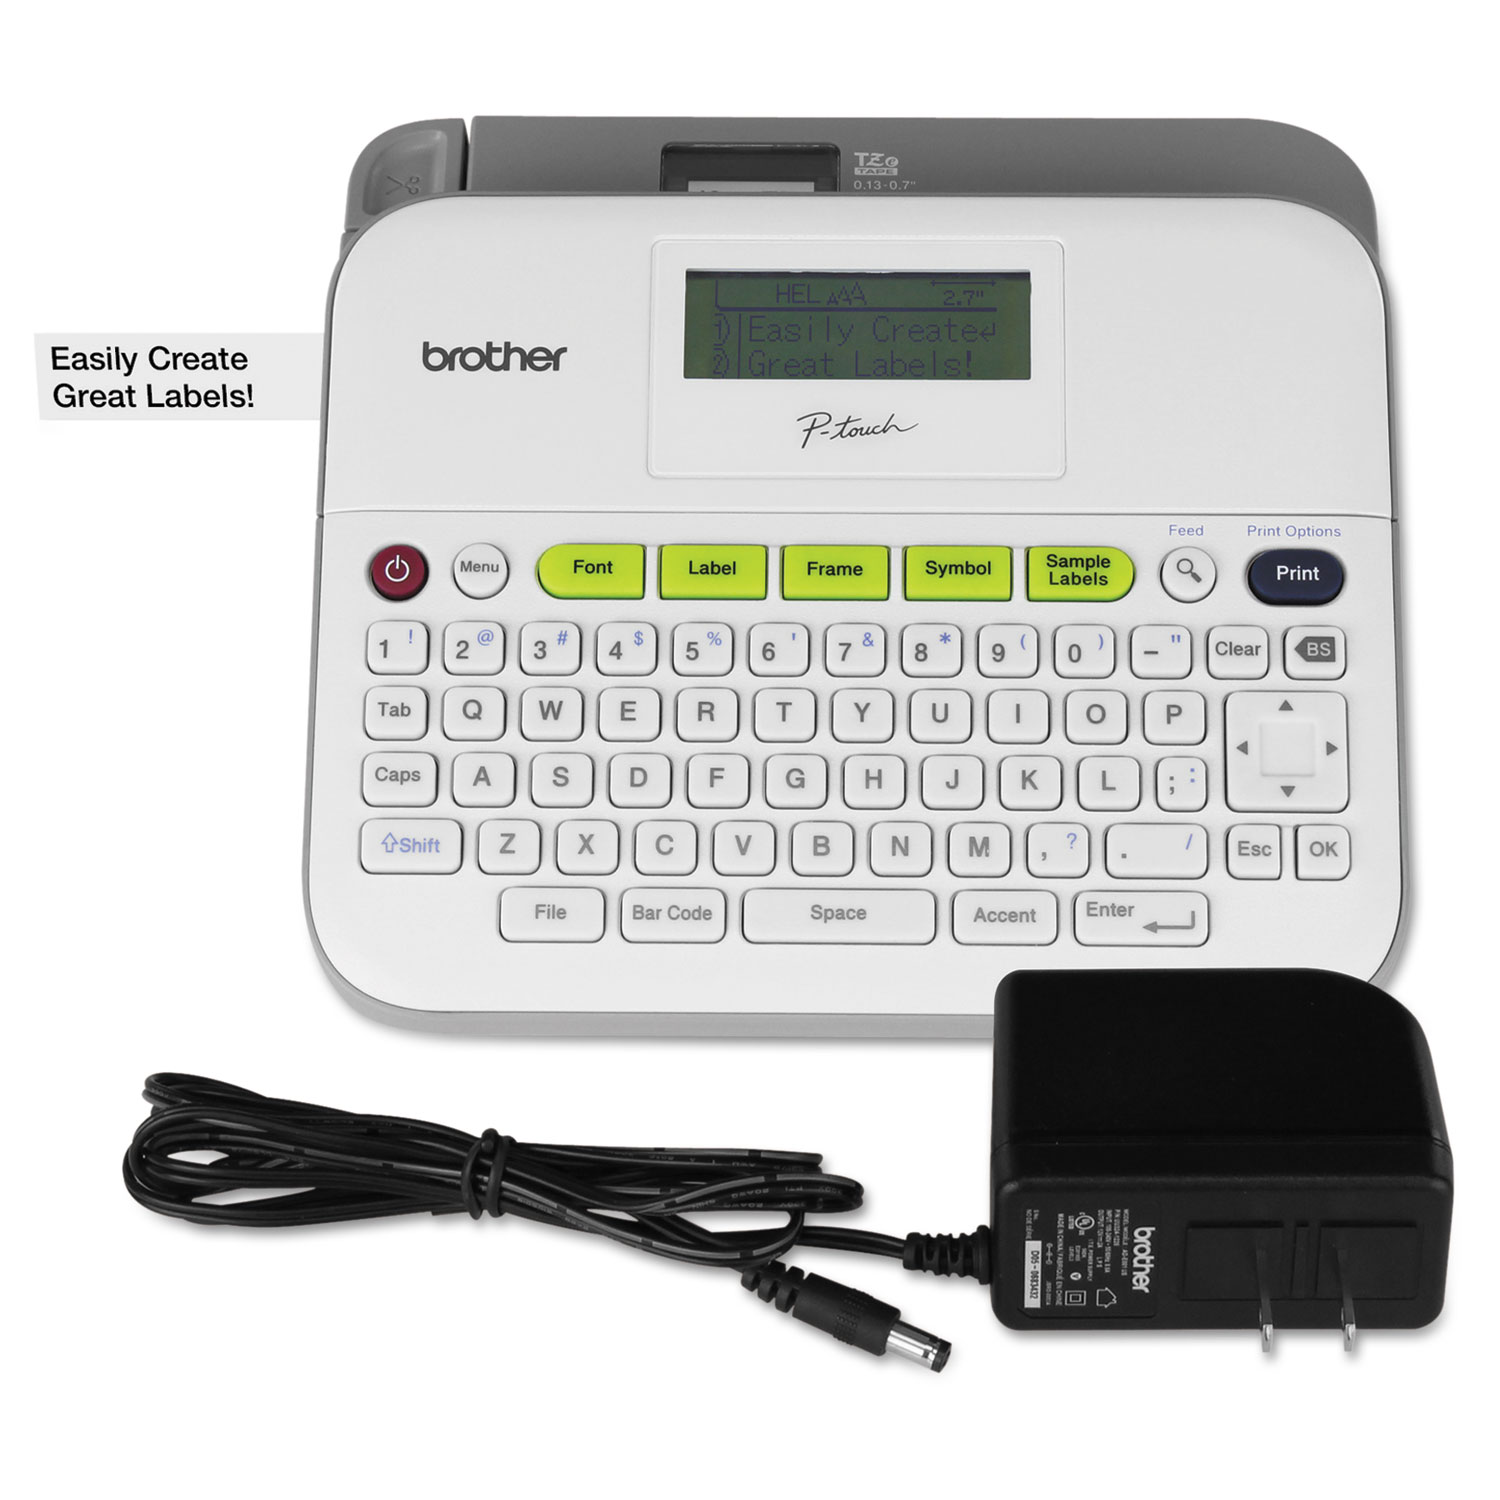  Brother P-Touch PTD400AD PTD400AD Versatile, Easy-to-Use Label Maker with AC Adapter 7.5w x 7d x 2.88h (BRTPTD400AD) 